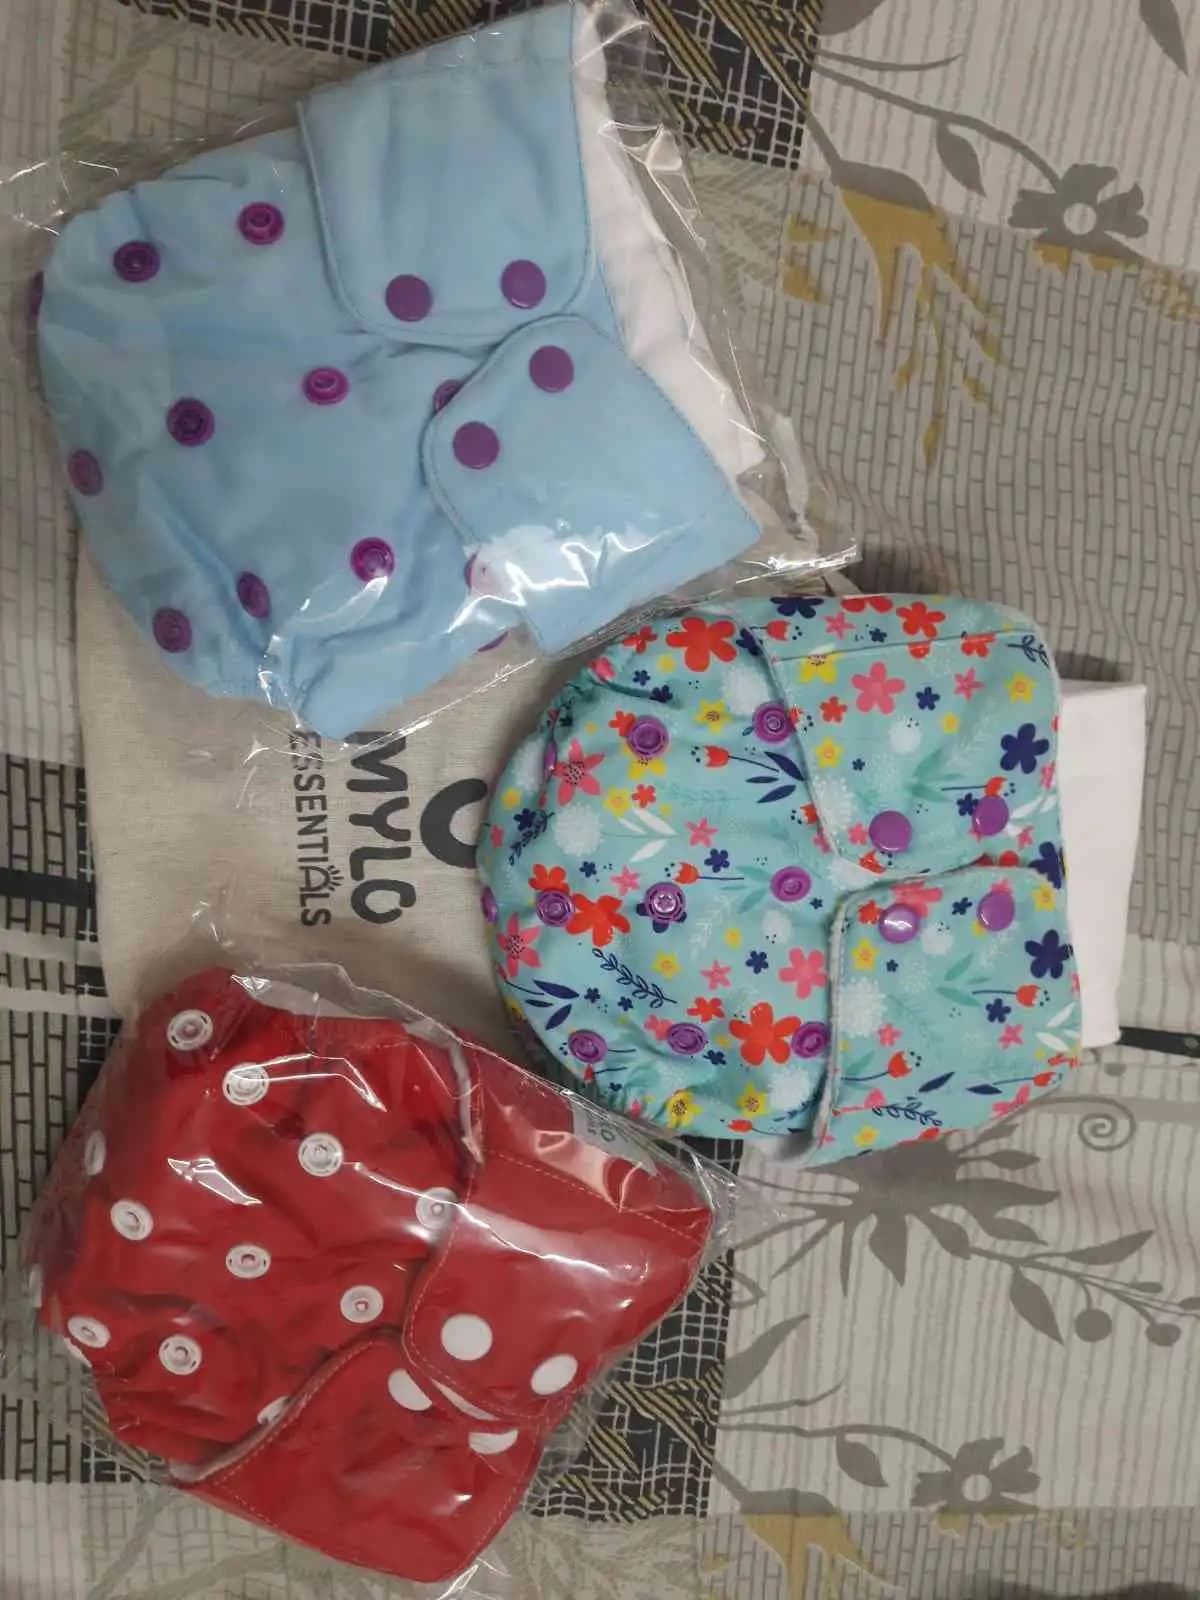 Free Size Reusable Cloth Diaper with Absorbent Insert Pad (3 - 36 Months) - Mix Pack of 3